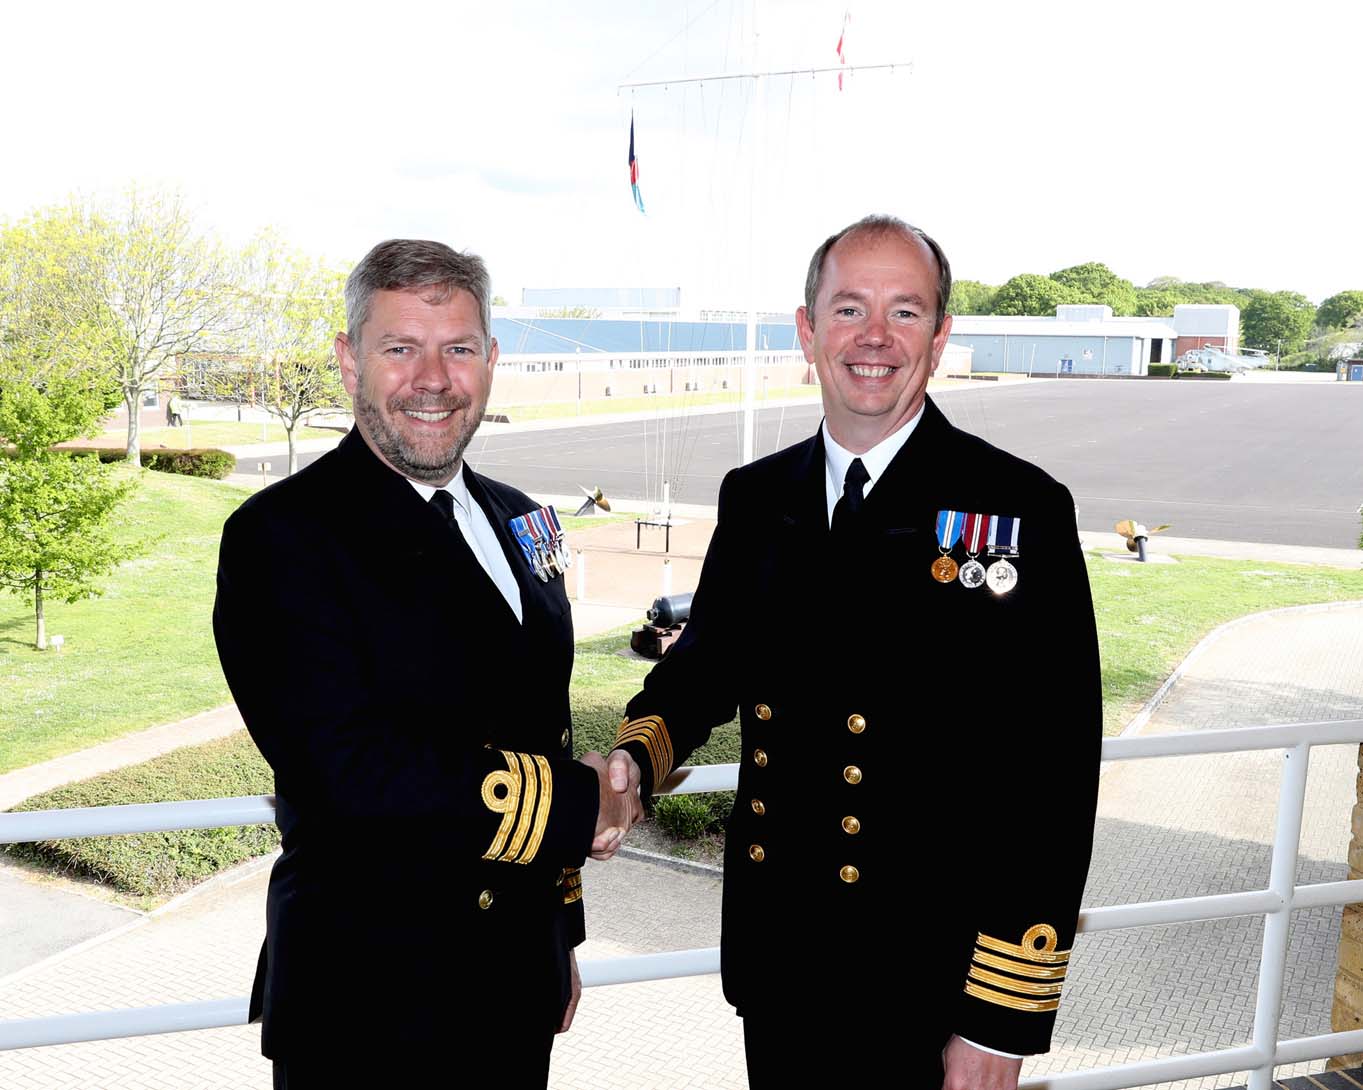 HMS Sultan welcomes new Commanding Officer | Royal Navy